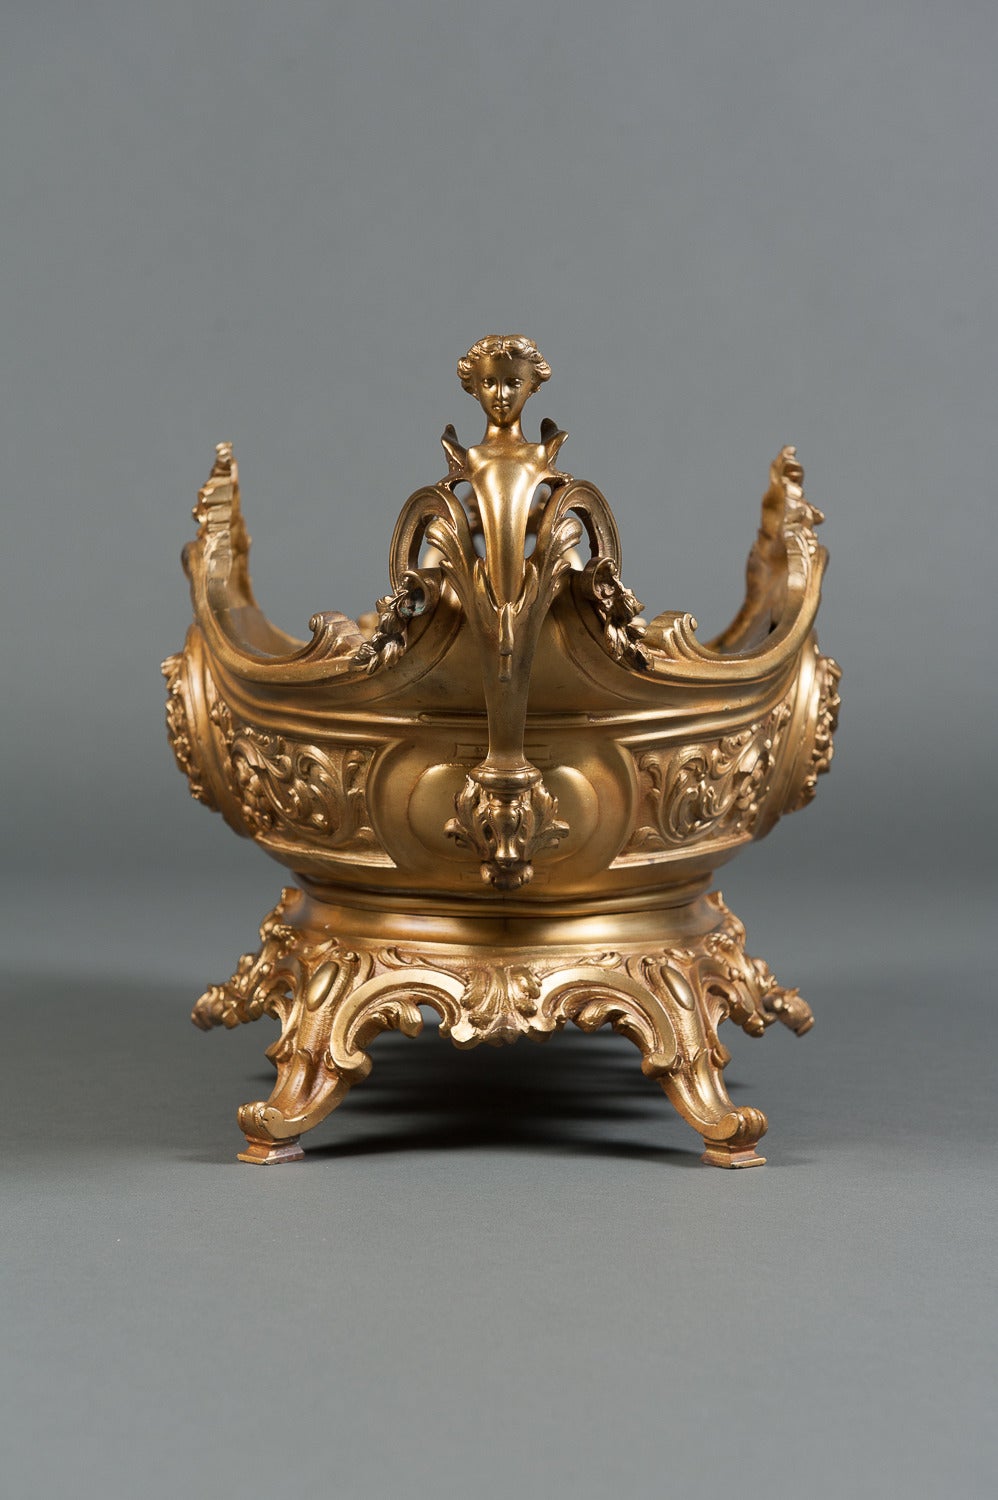 A large antique French gilt bronze figural centerpiece flanked by female herm-form handles.
Circa 1900

Height: 13